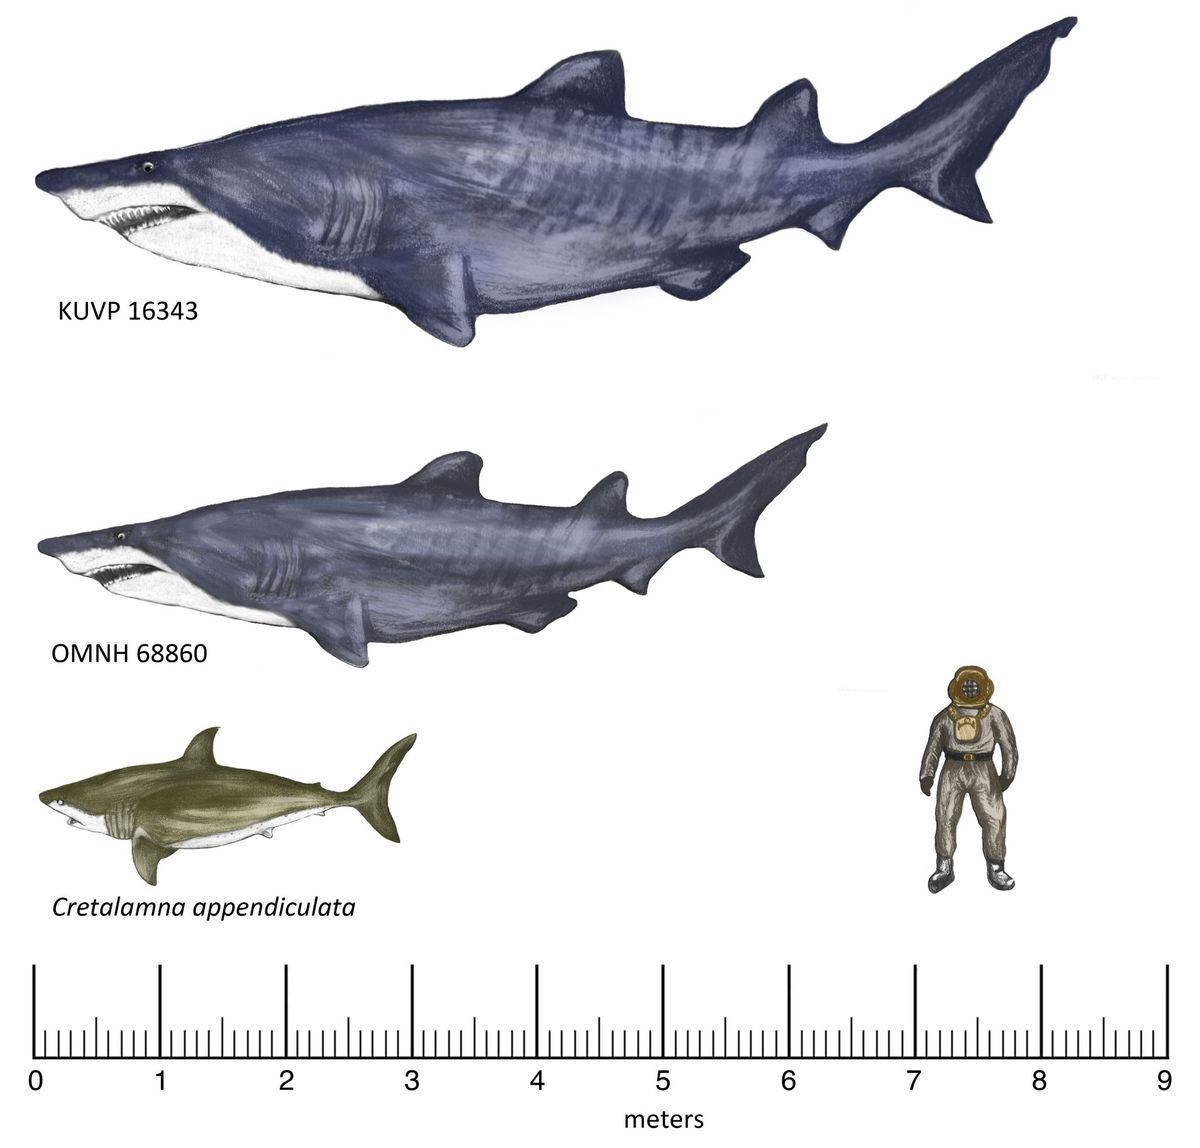 Monster Shark Once Trolled the Mesozoic Seas | Live Science